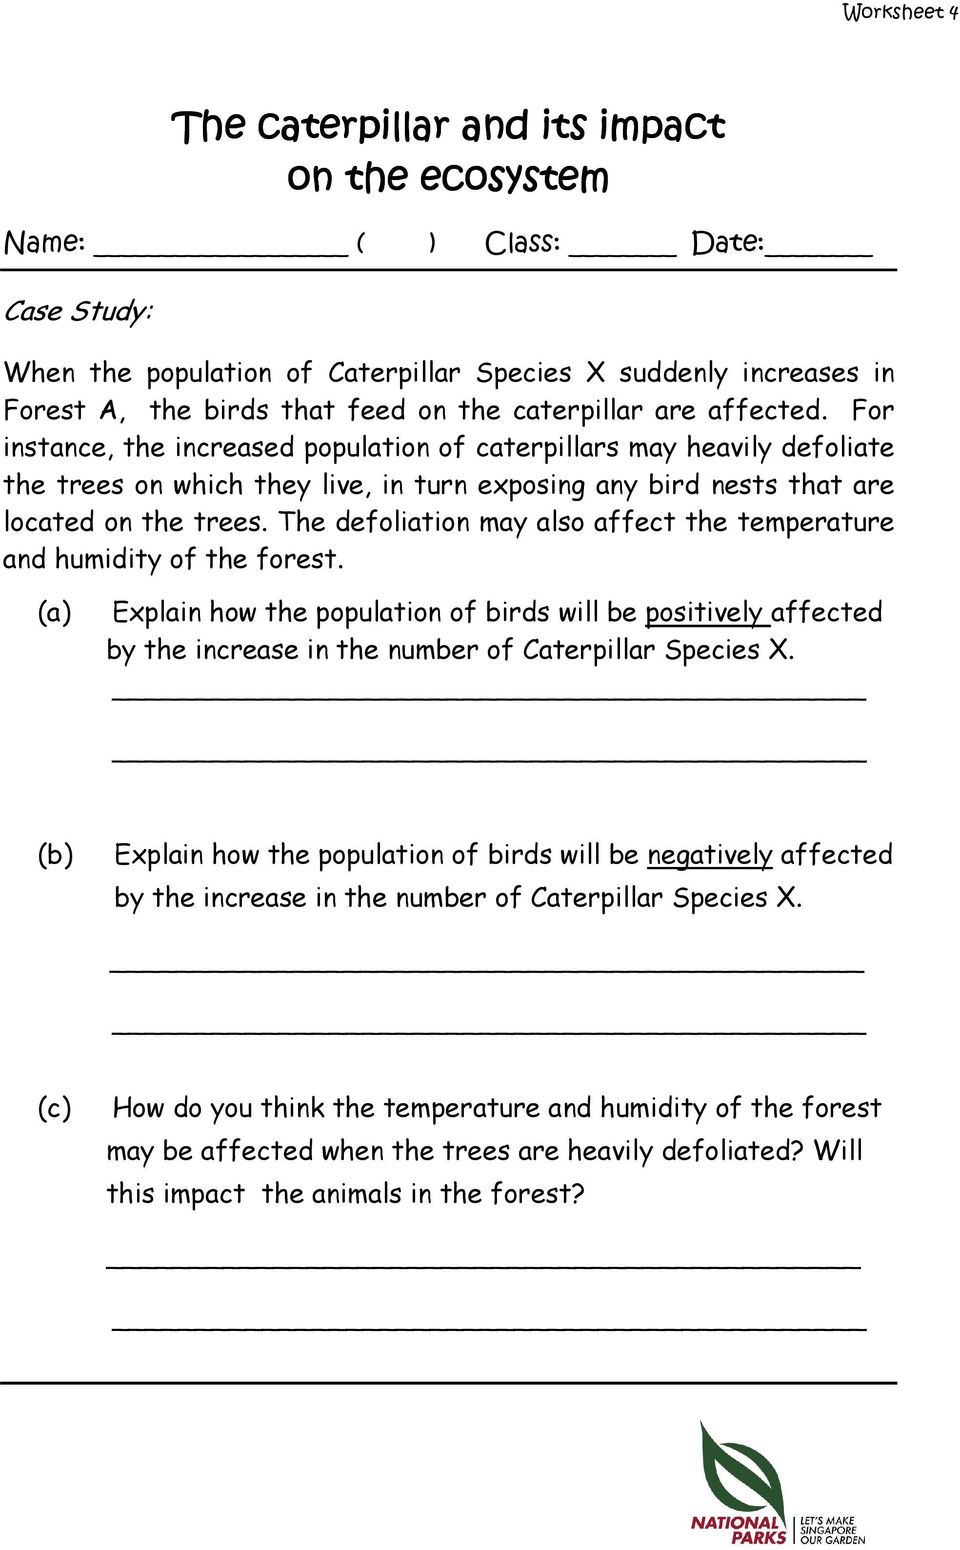 The defoliation may also affect the temperature and humidity of the forest. (a) Explain how the population of birds will be positively affected by the increase in the number of Caterpillar Species X.